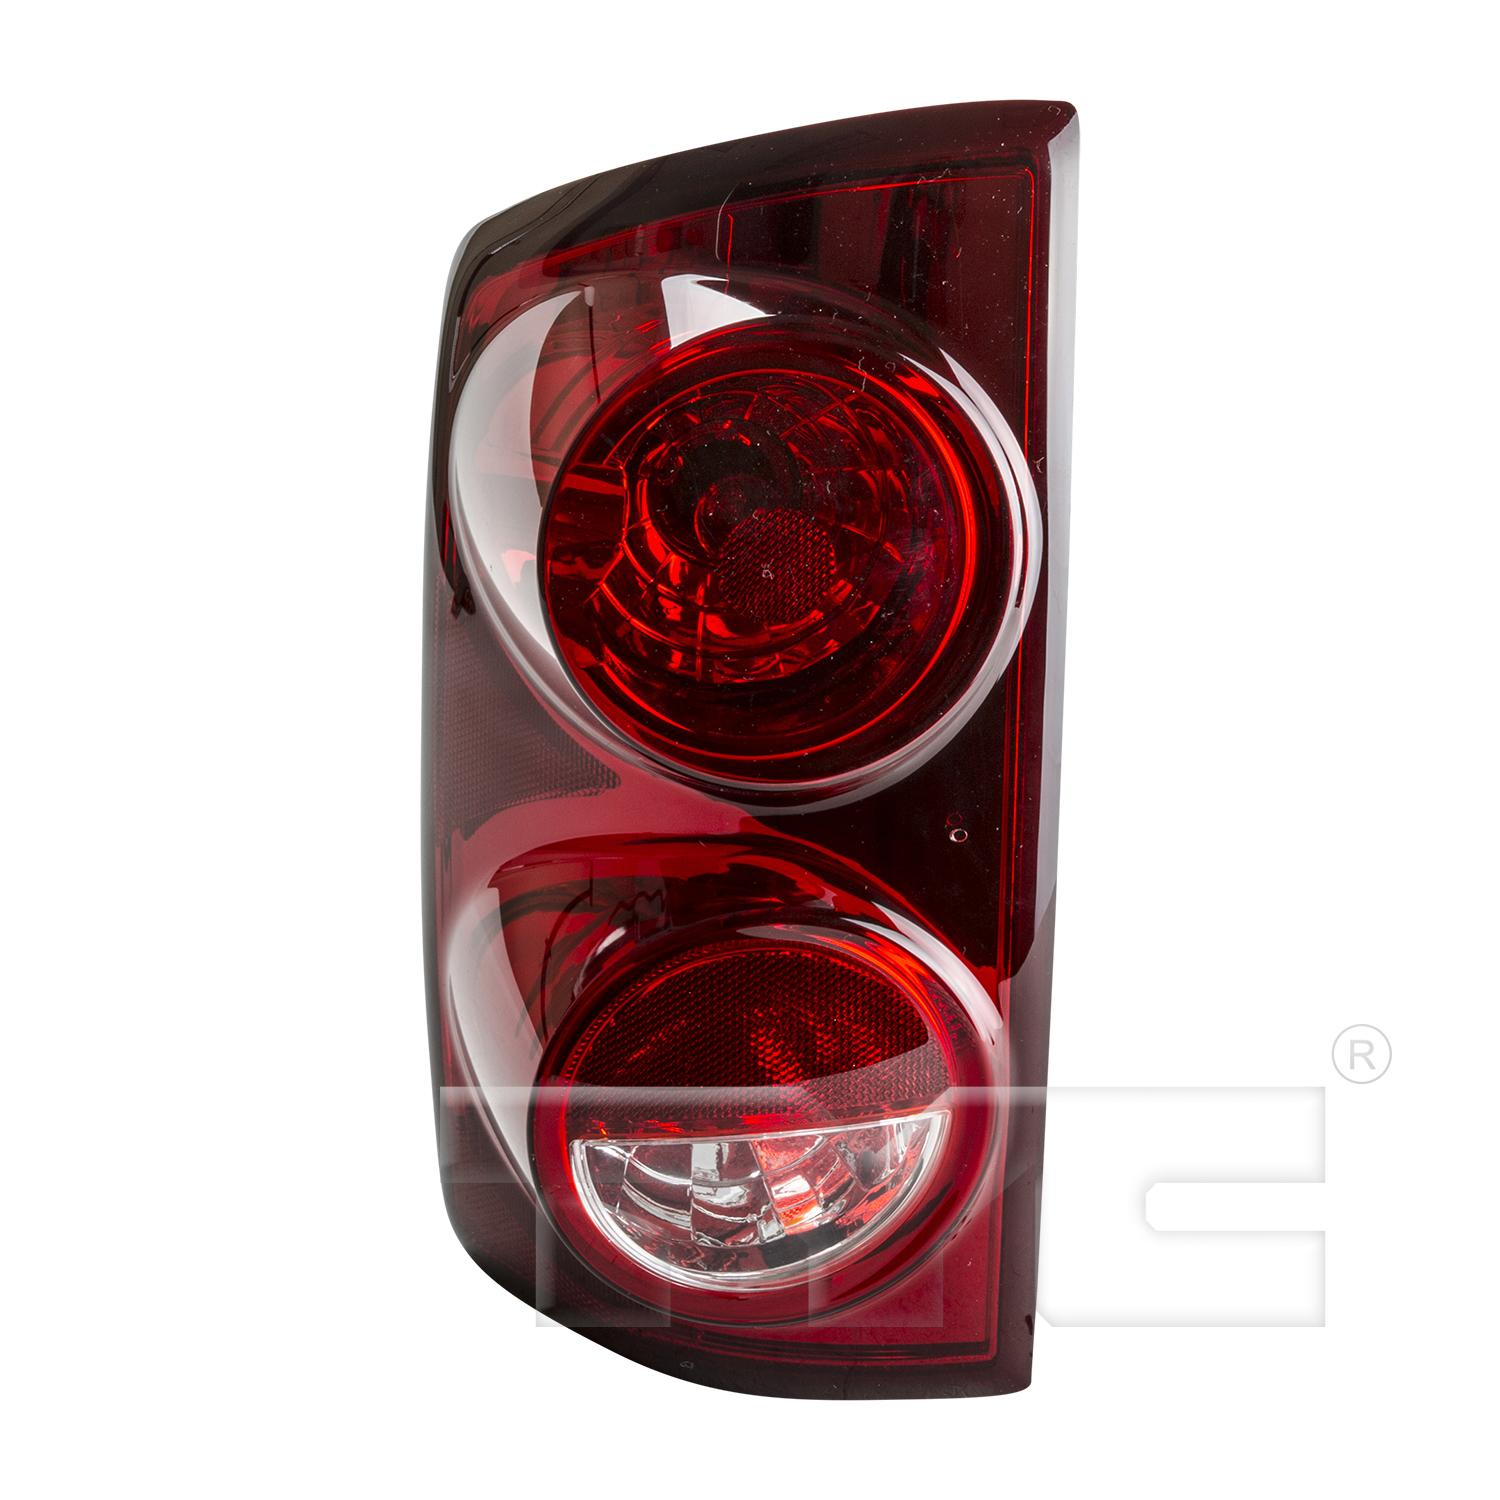 Aftermarket TAILLIGHTS for DODGE - RAM 2500, RAM 2500,07-09,LT Taillamp assy